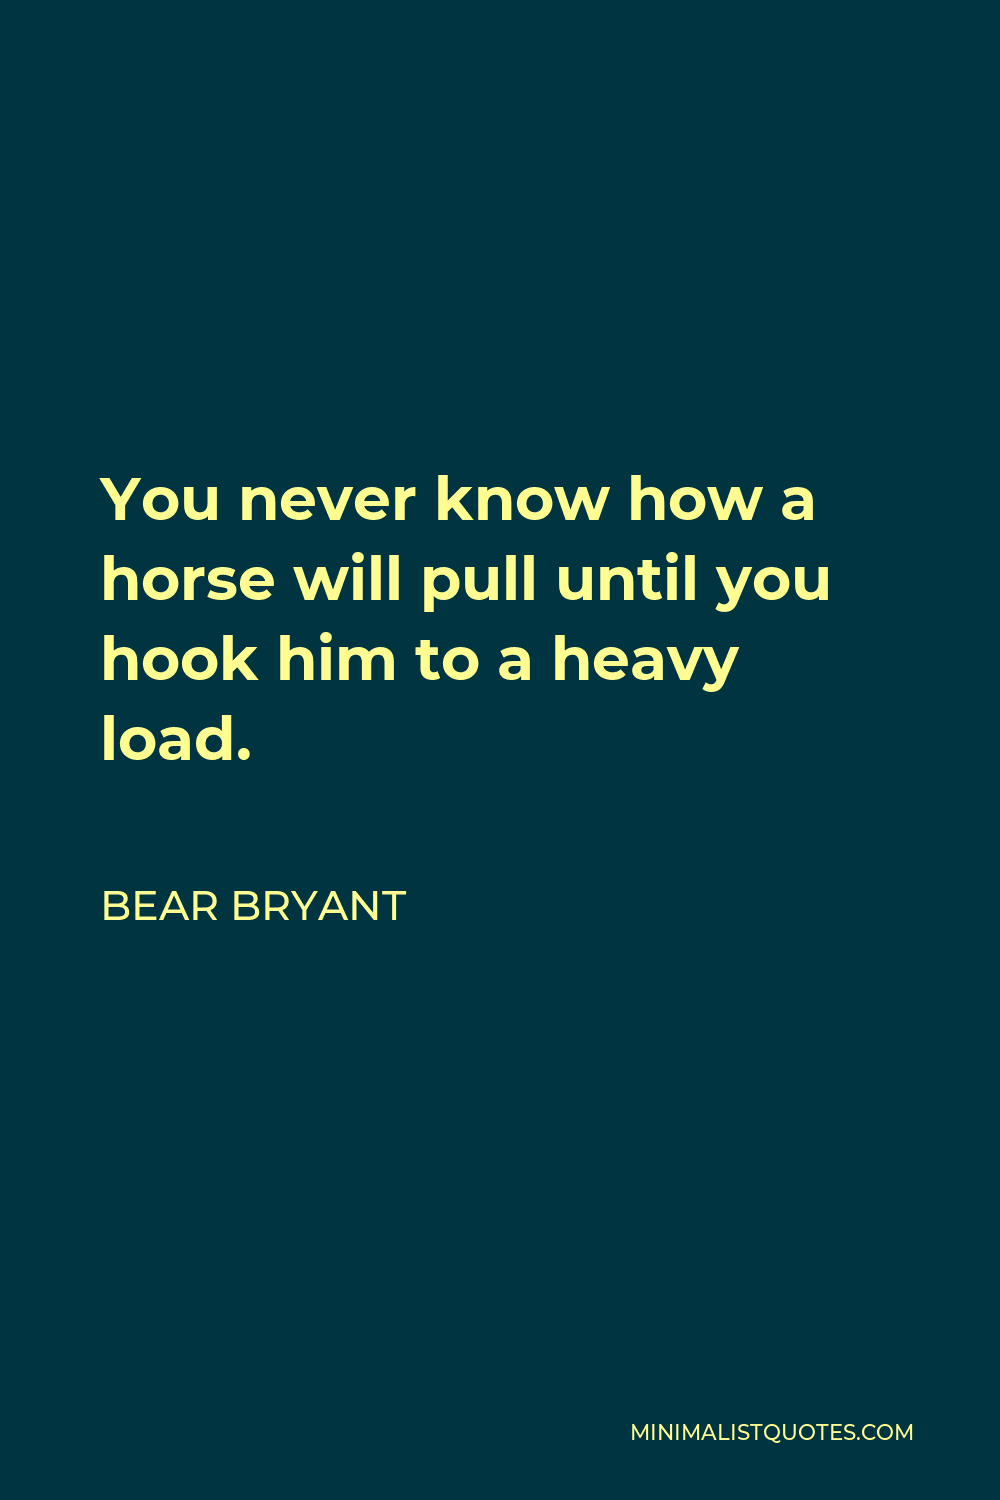 Bear Bryant Quote - You never know how a horse will pull until you hook him to a heavy load.